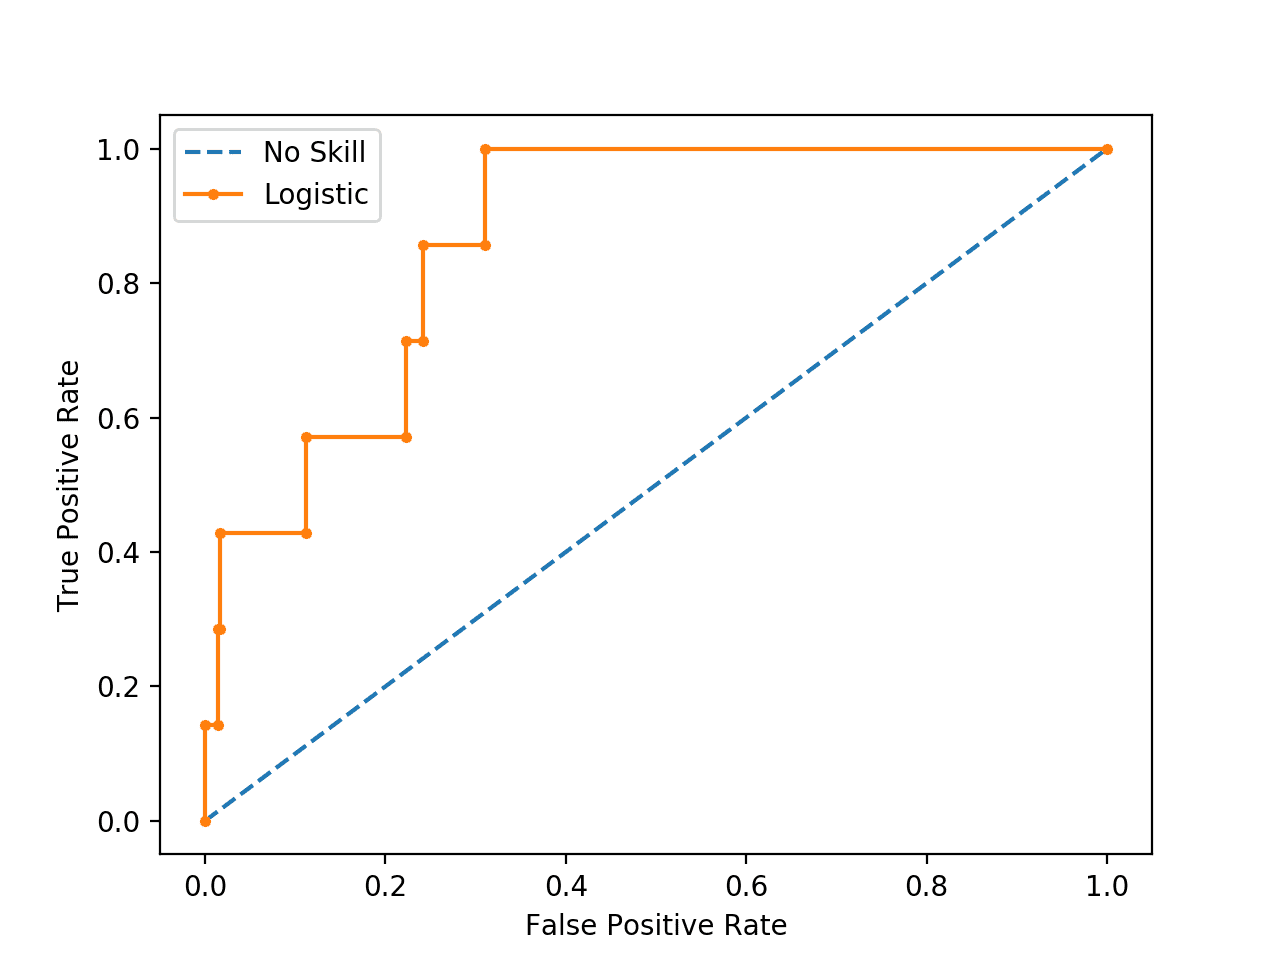 Plot of ROC Curve for Logistic Regression on Imbalanced Classification Dataset